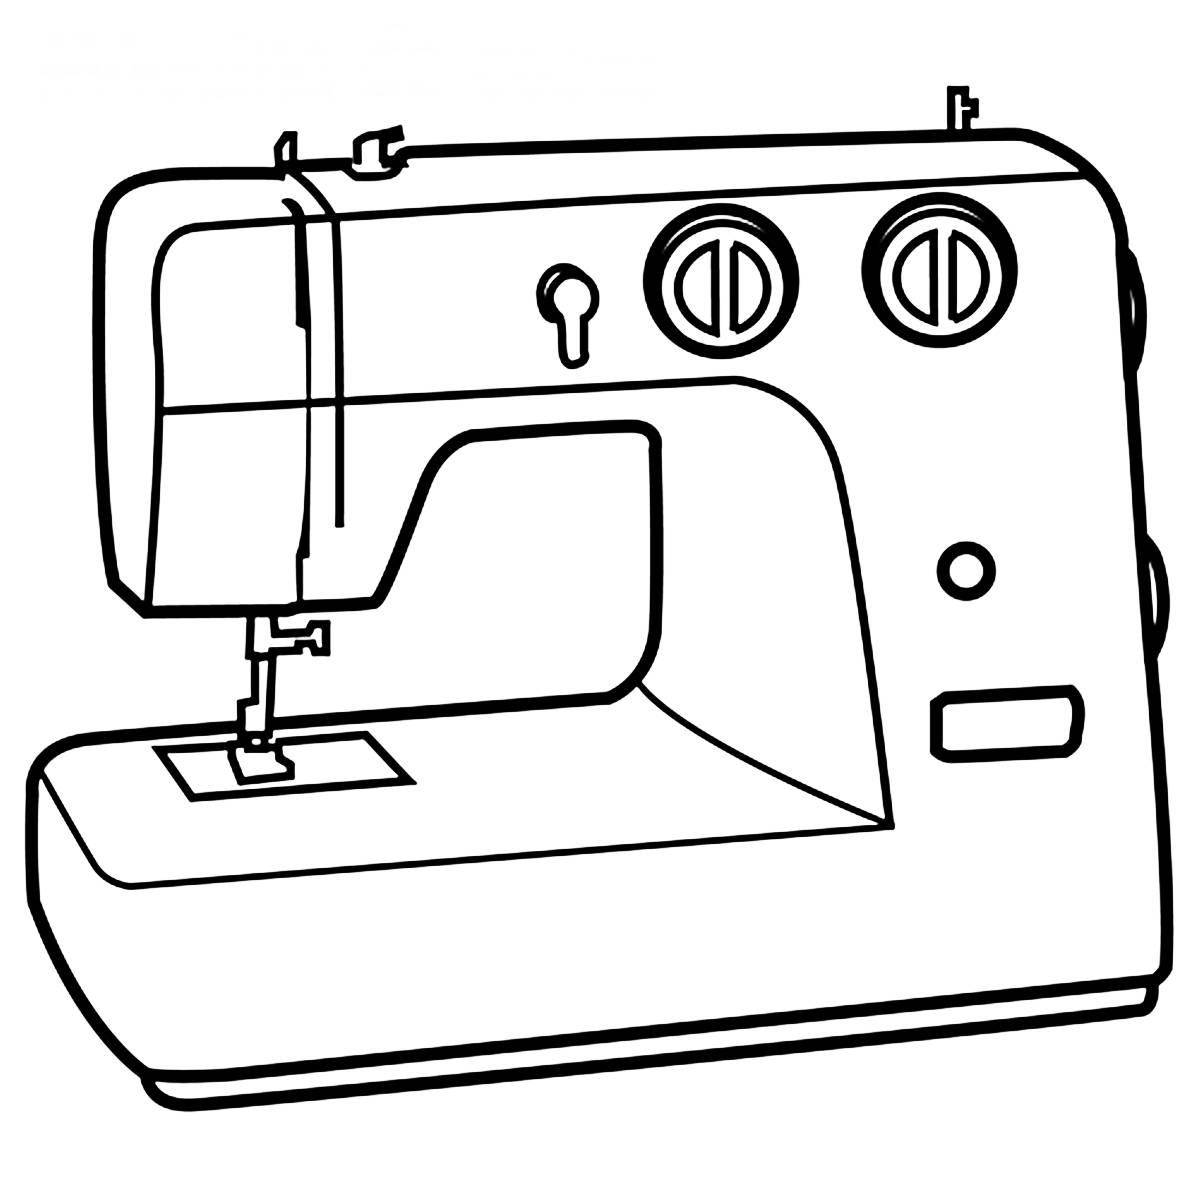 Colorful sewing machine coloring page